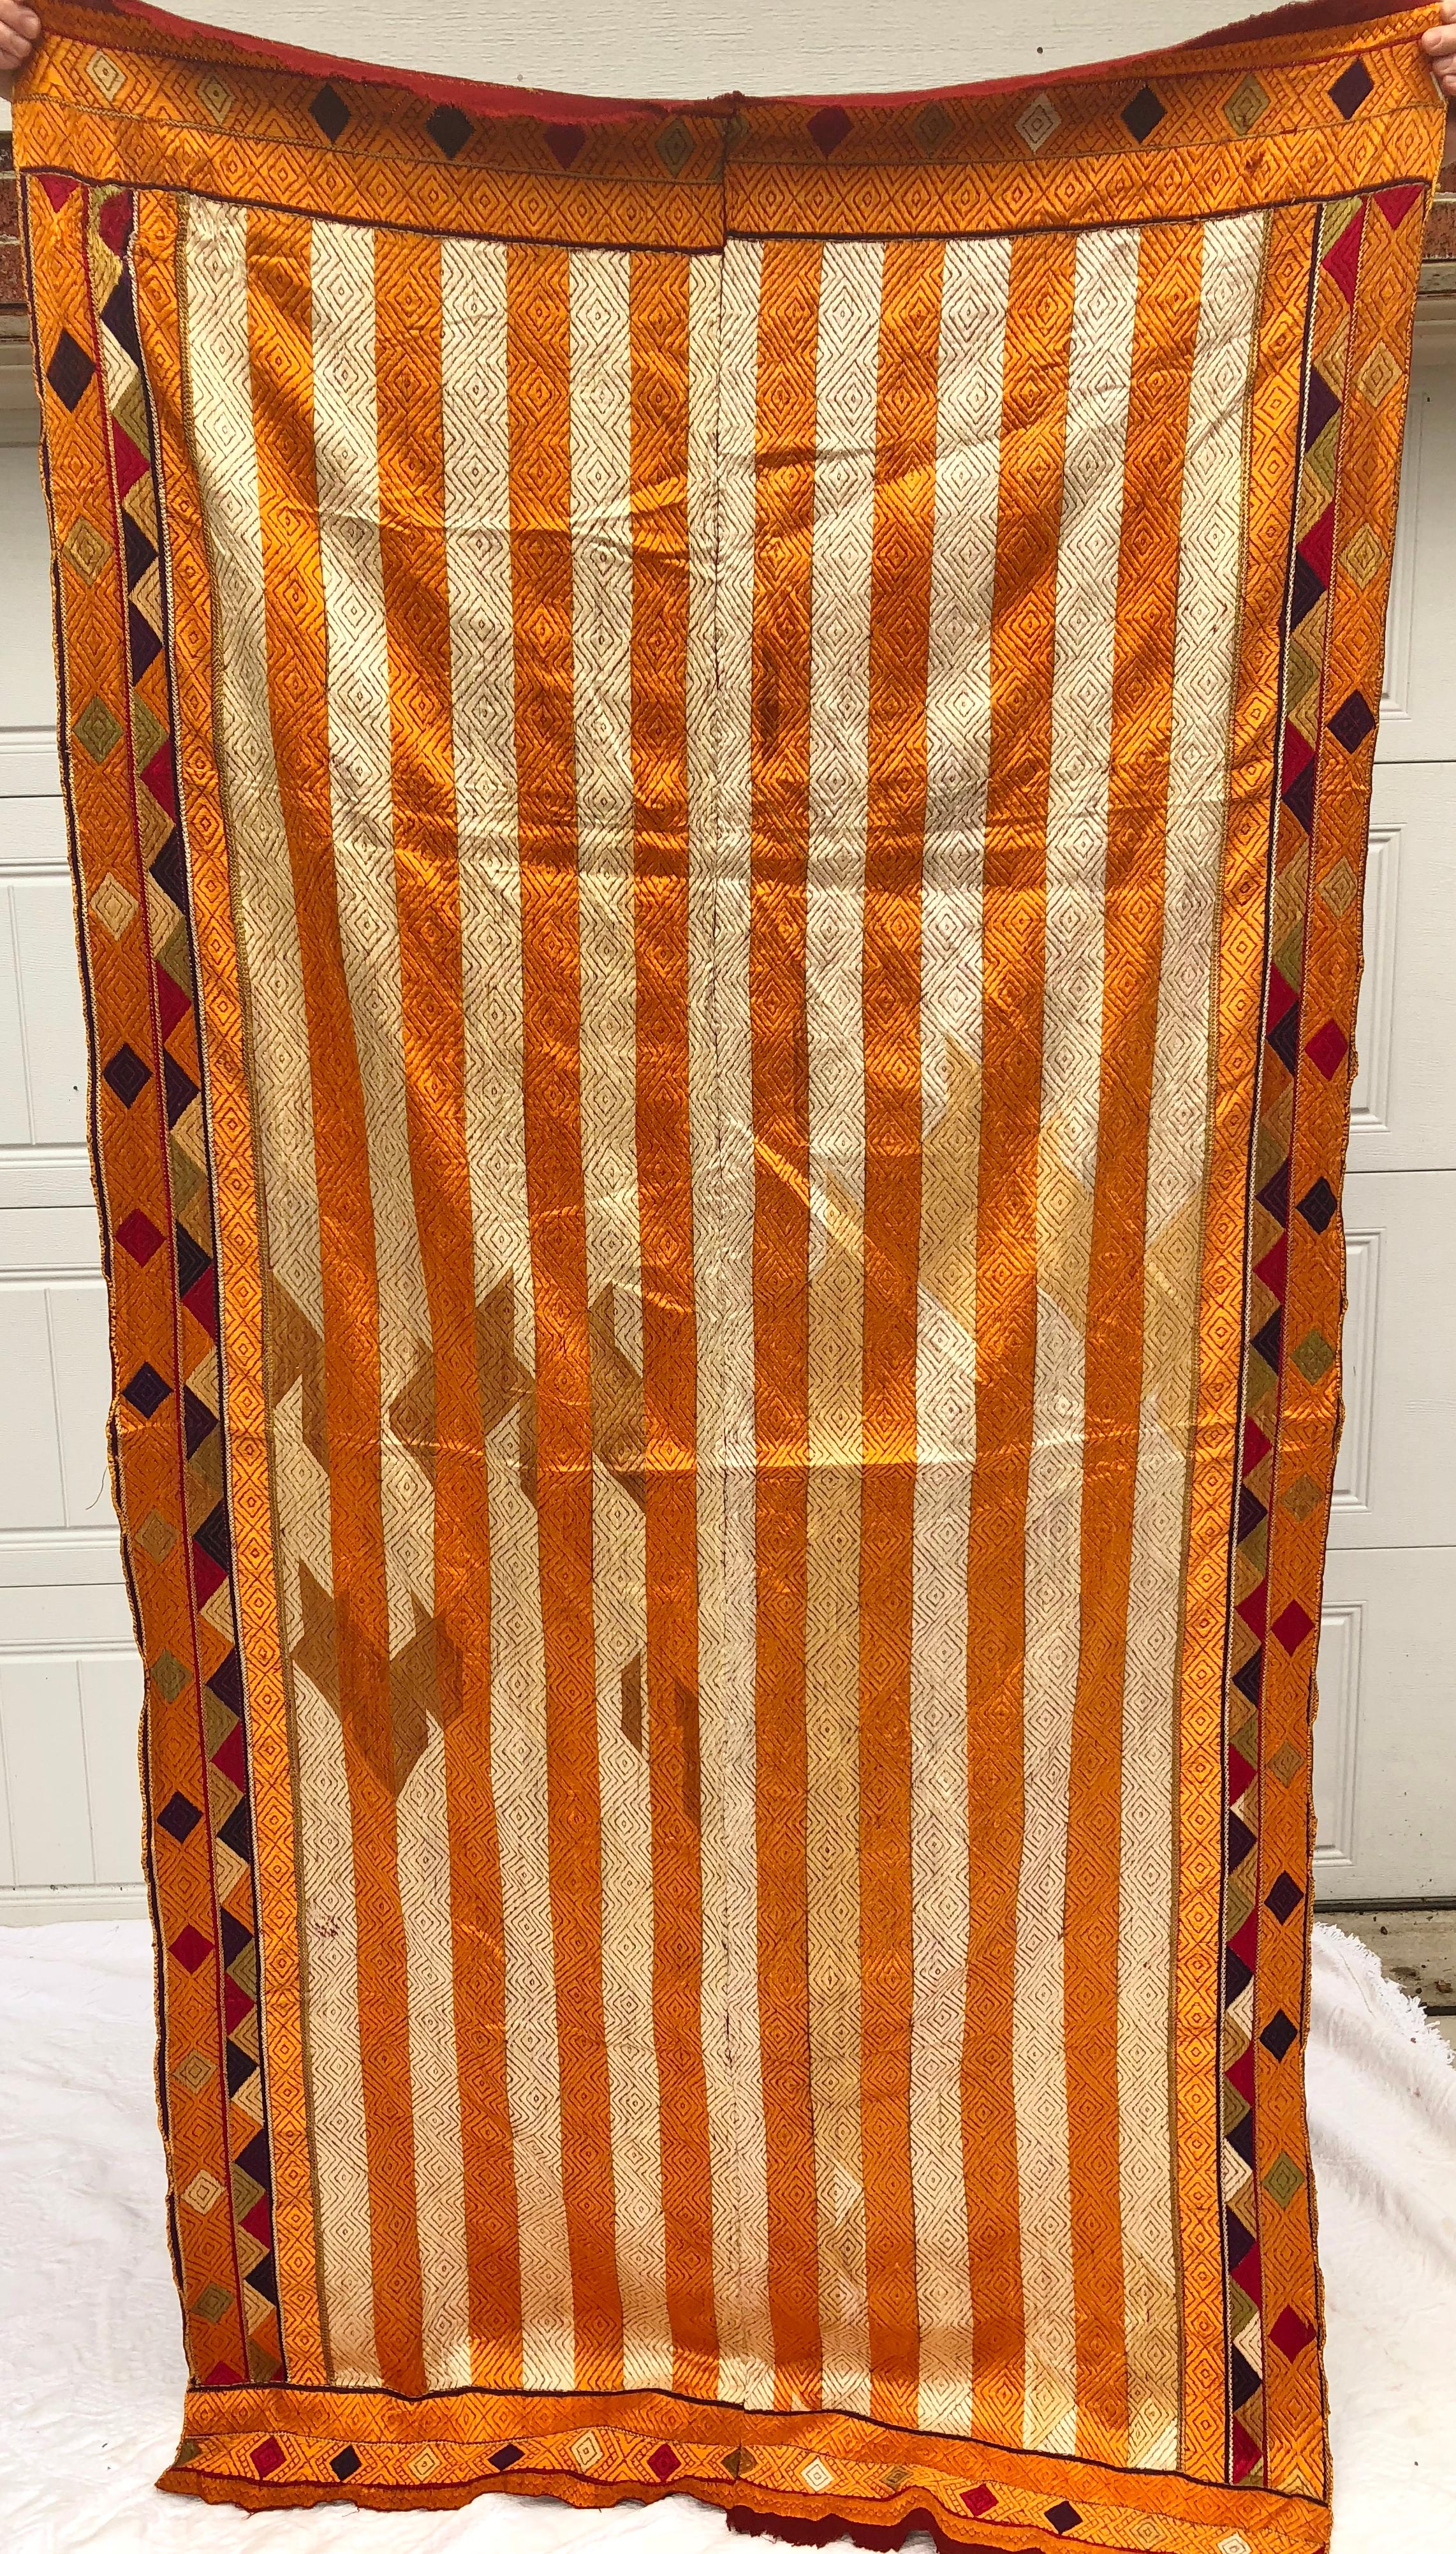 Vintage phulkari bagh wedding shawl from Punjab, India. The cotton hand loomed khadi cloth is hand embroidered with vibrant silk threads by members of the young girl's family for her wedding. Shawl is in good condition for it's age. There are no